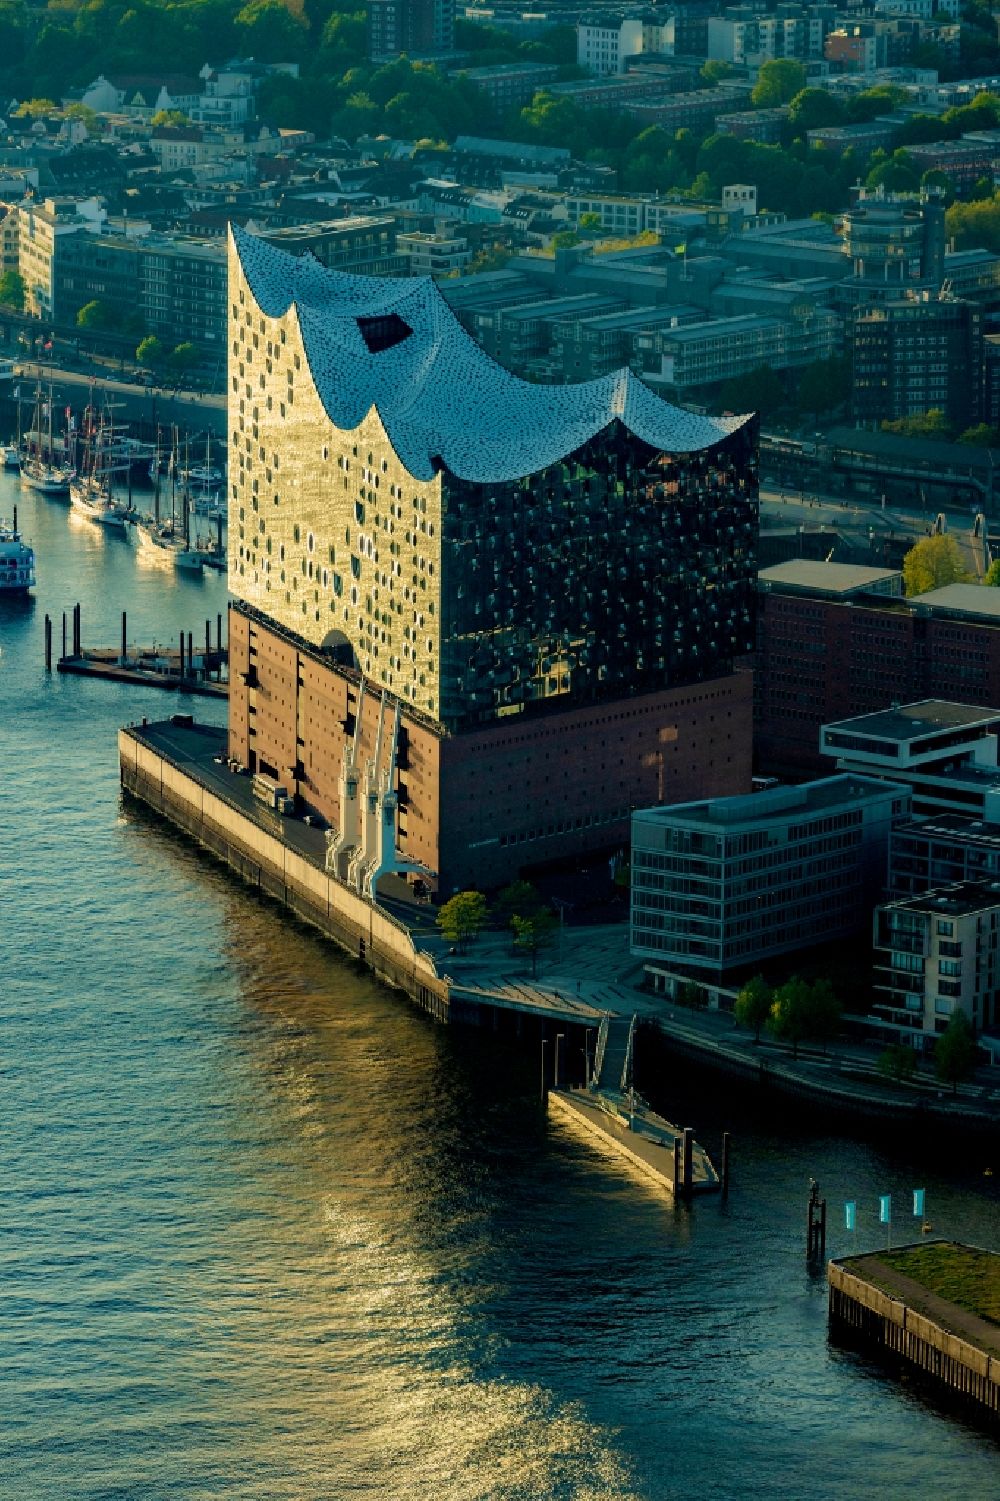 Hamburg from the bird's eye view: The Elbe Philharmonic Hall on the river bank of the Elbe in Hamburg